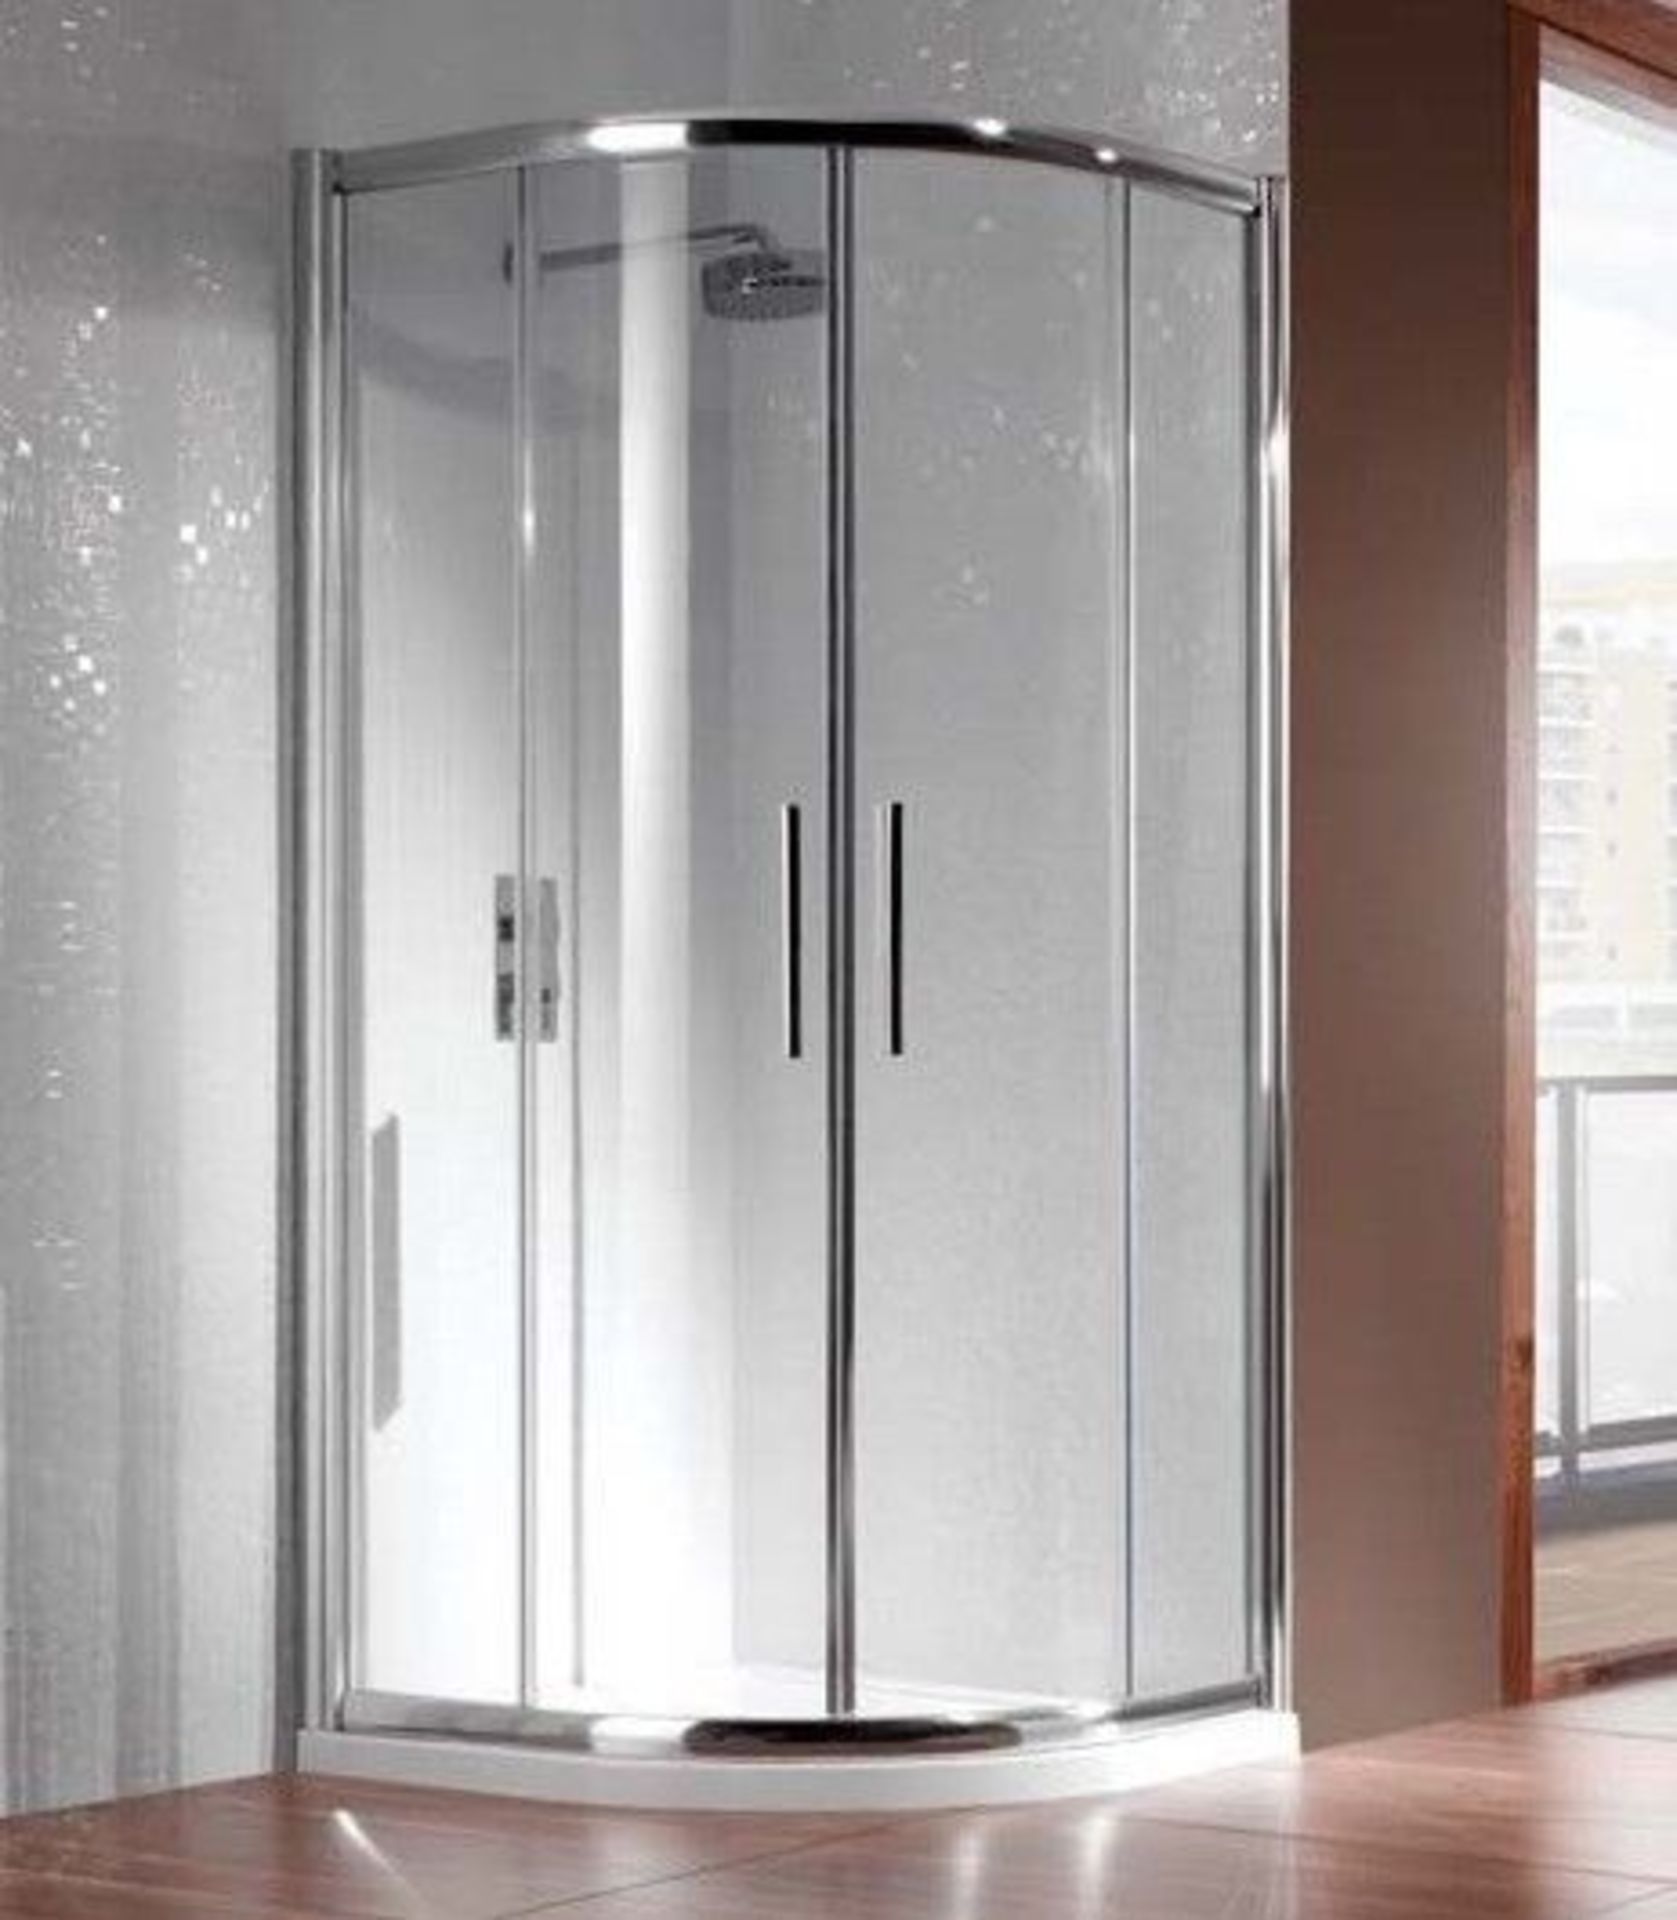 Manhattan glass Quad shower enclosure (no Tray), 900 x 900m, unused and boxed, comes in 2 boxes